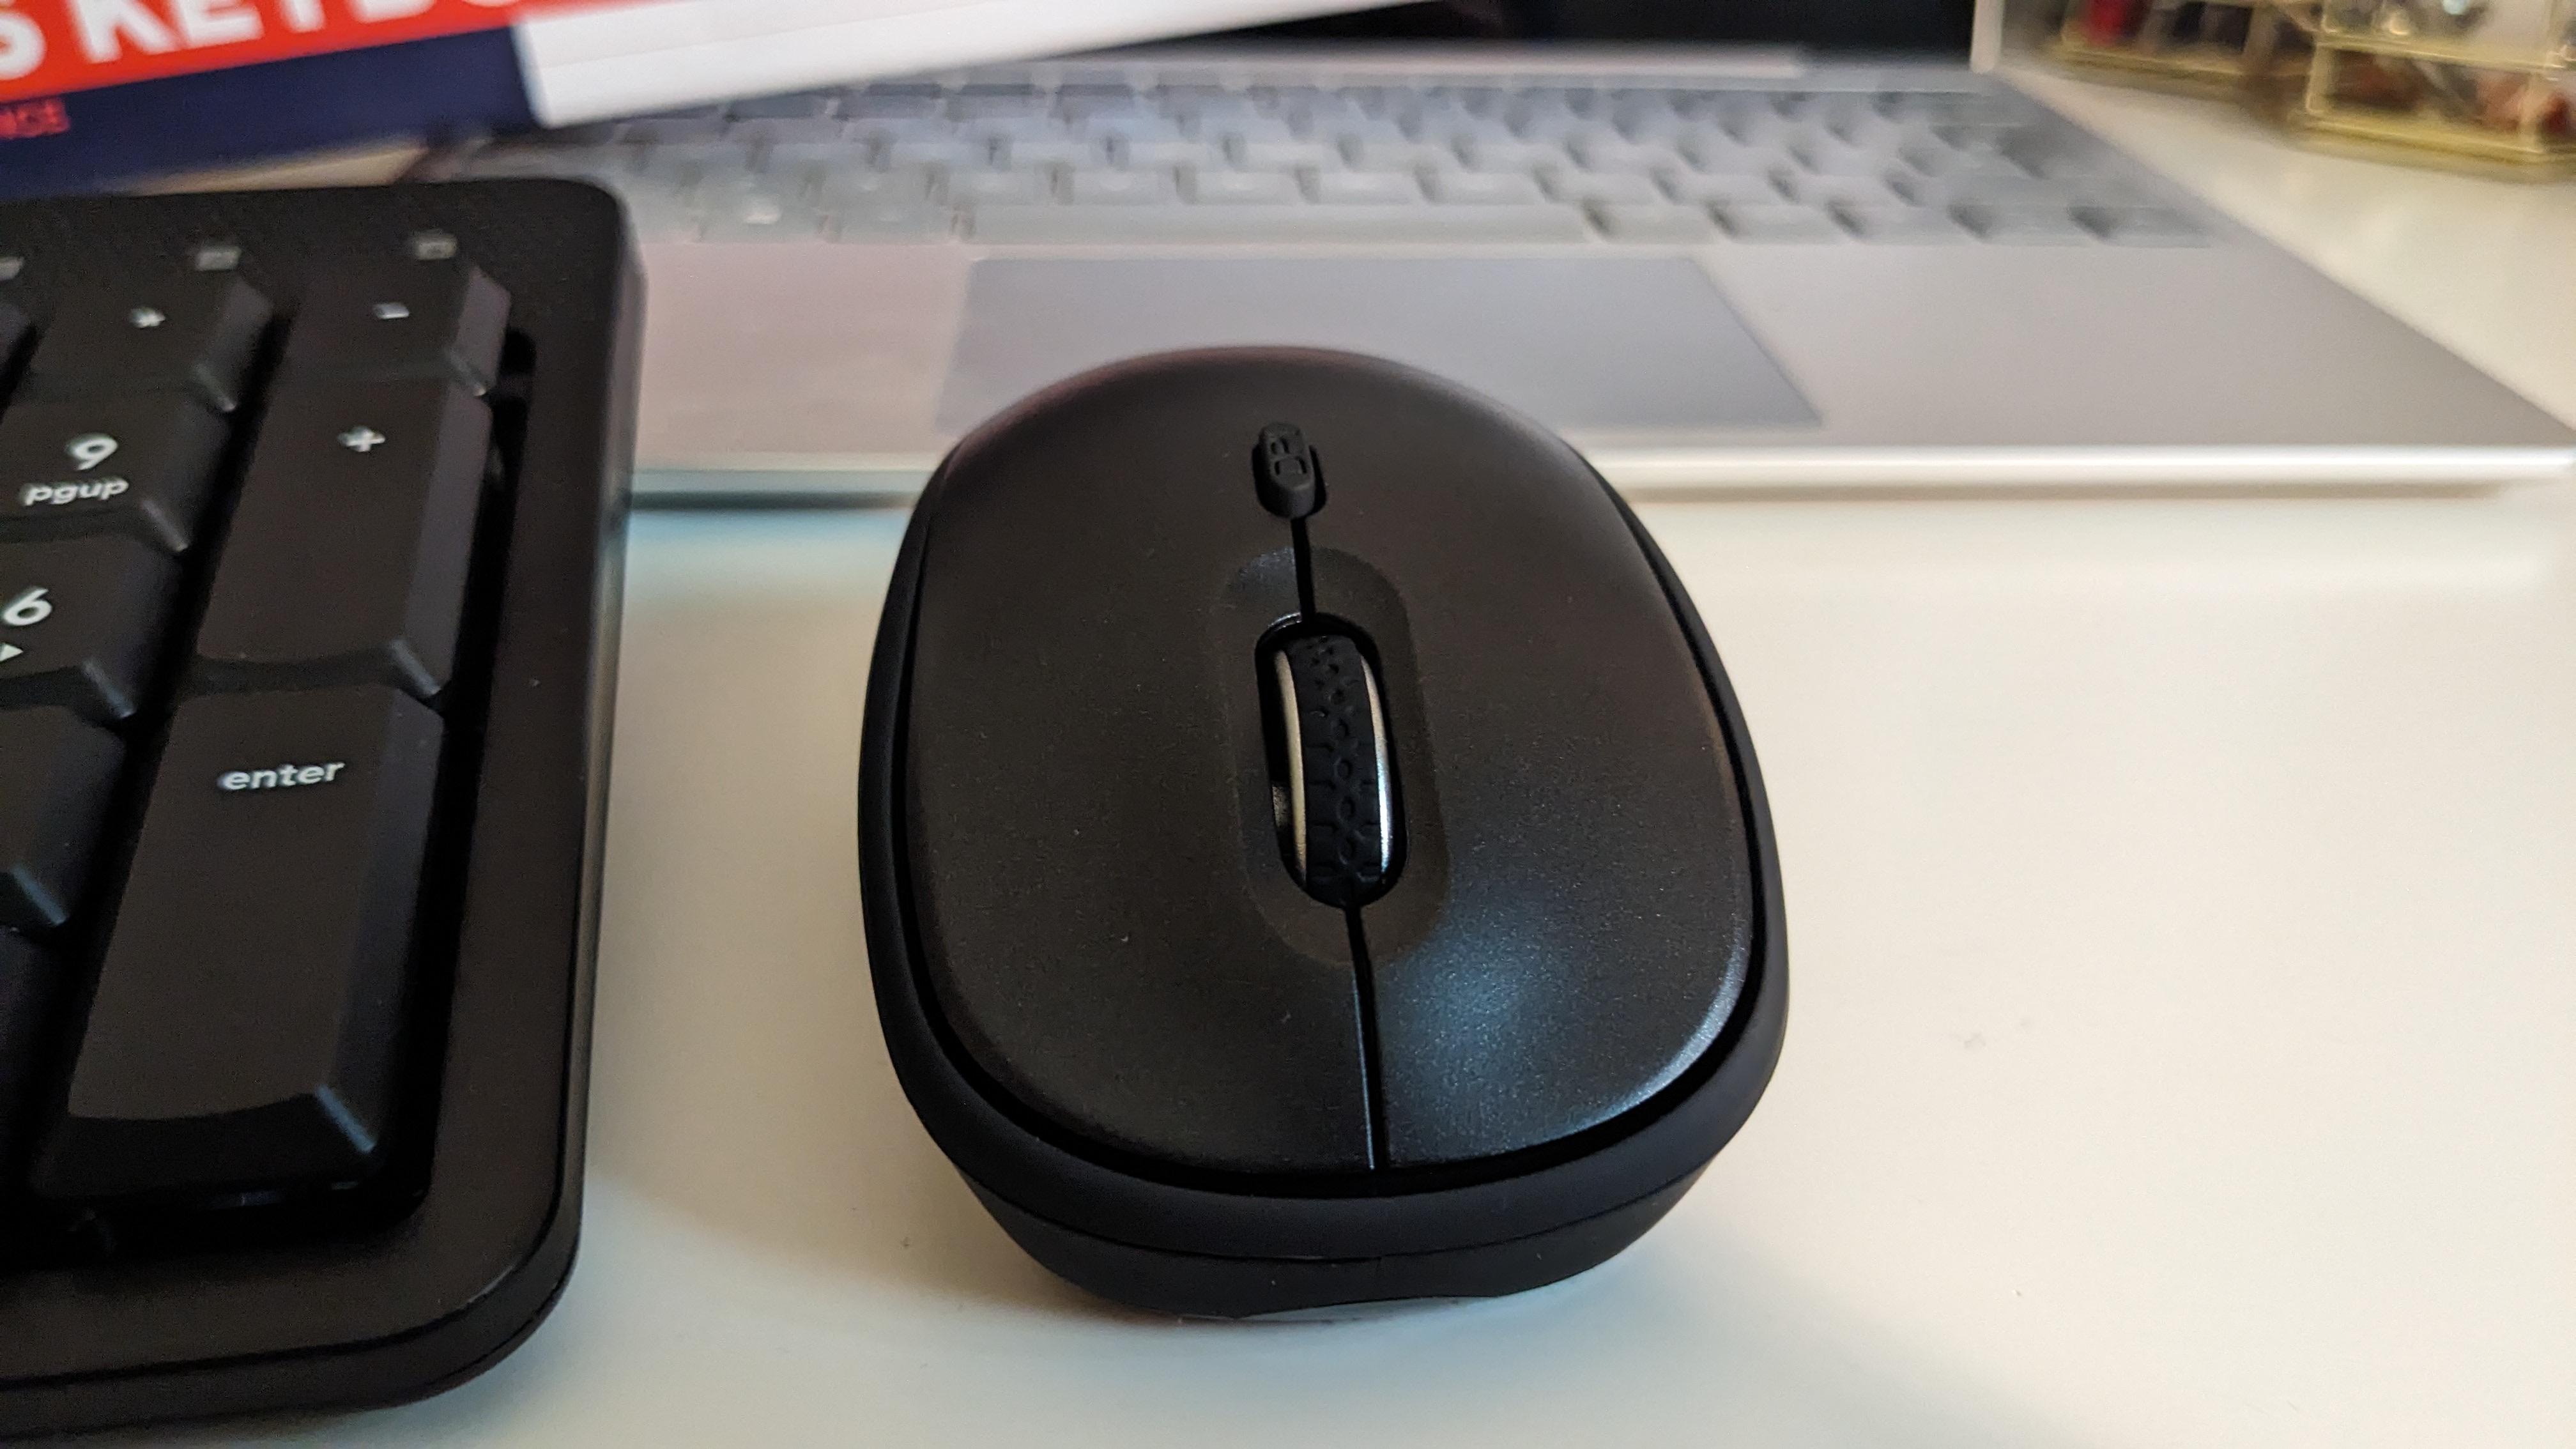 Trust Ody II Silent Wireless keyboard and mouse during our test and review process